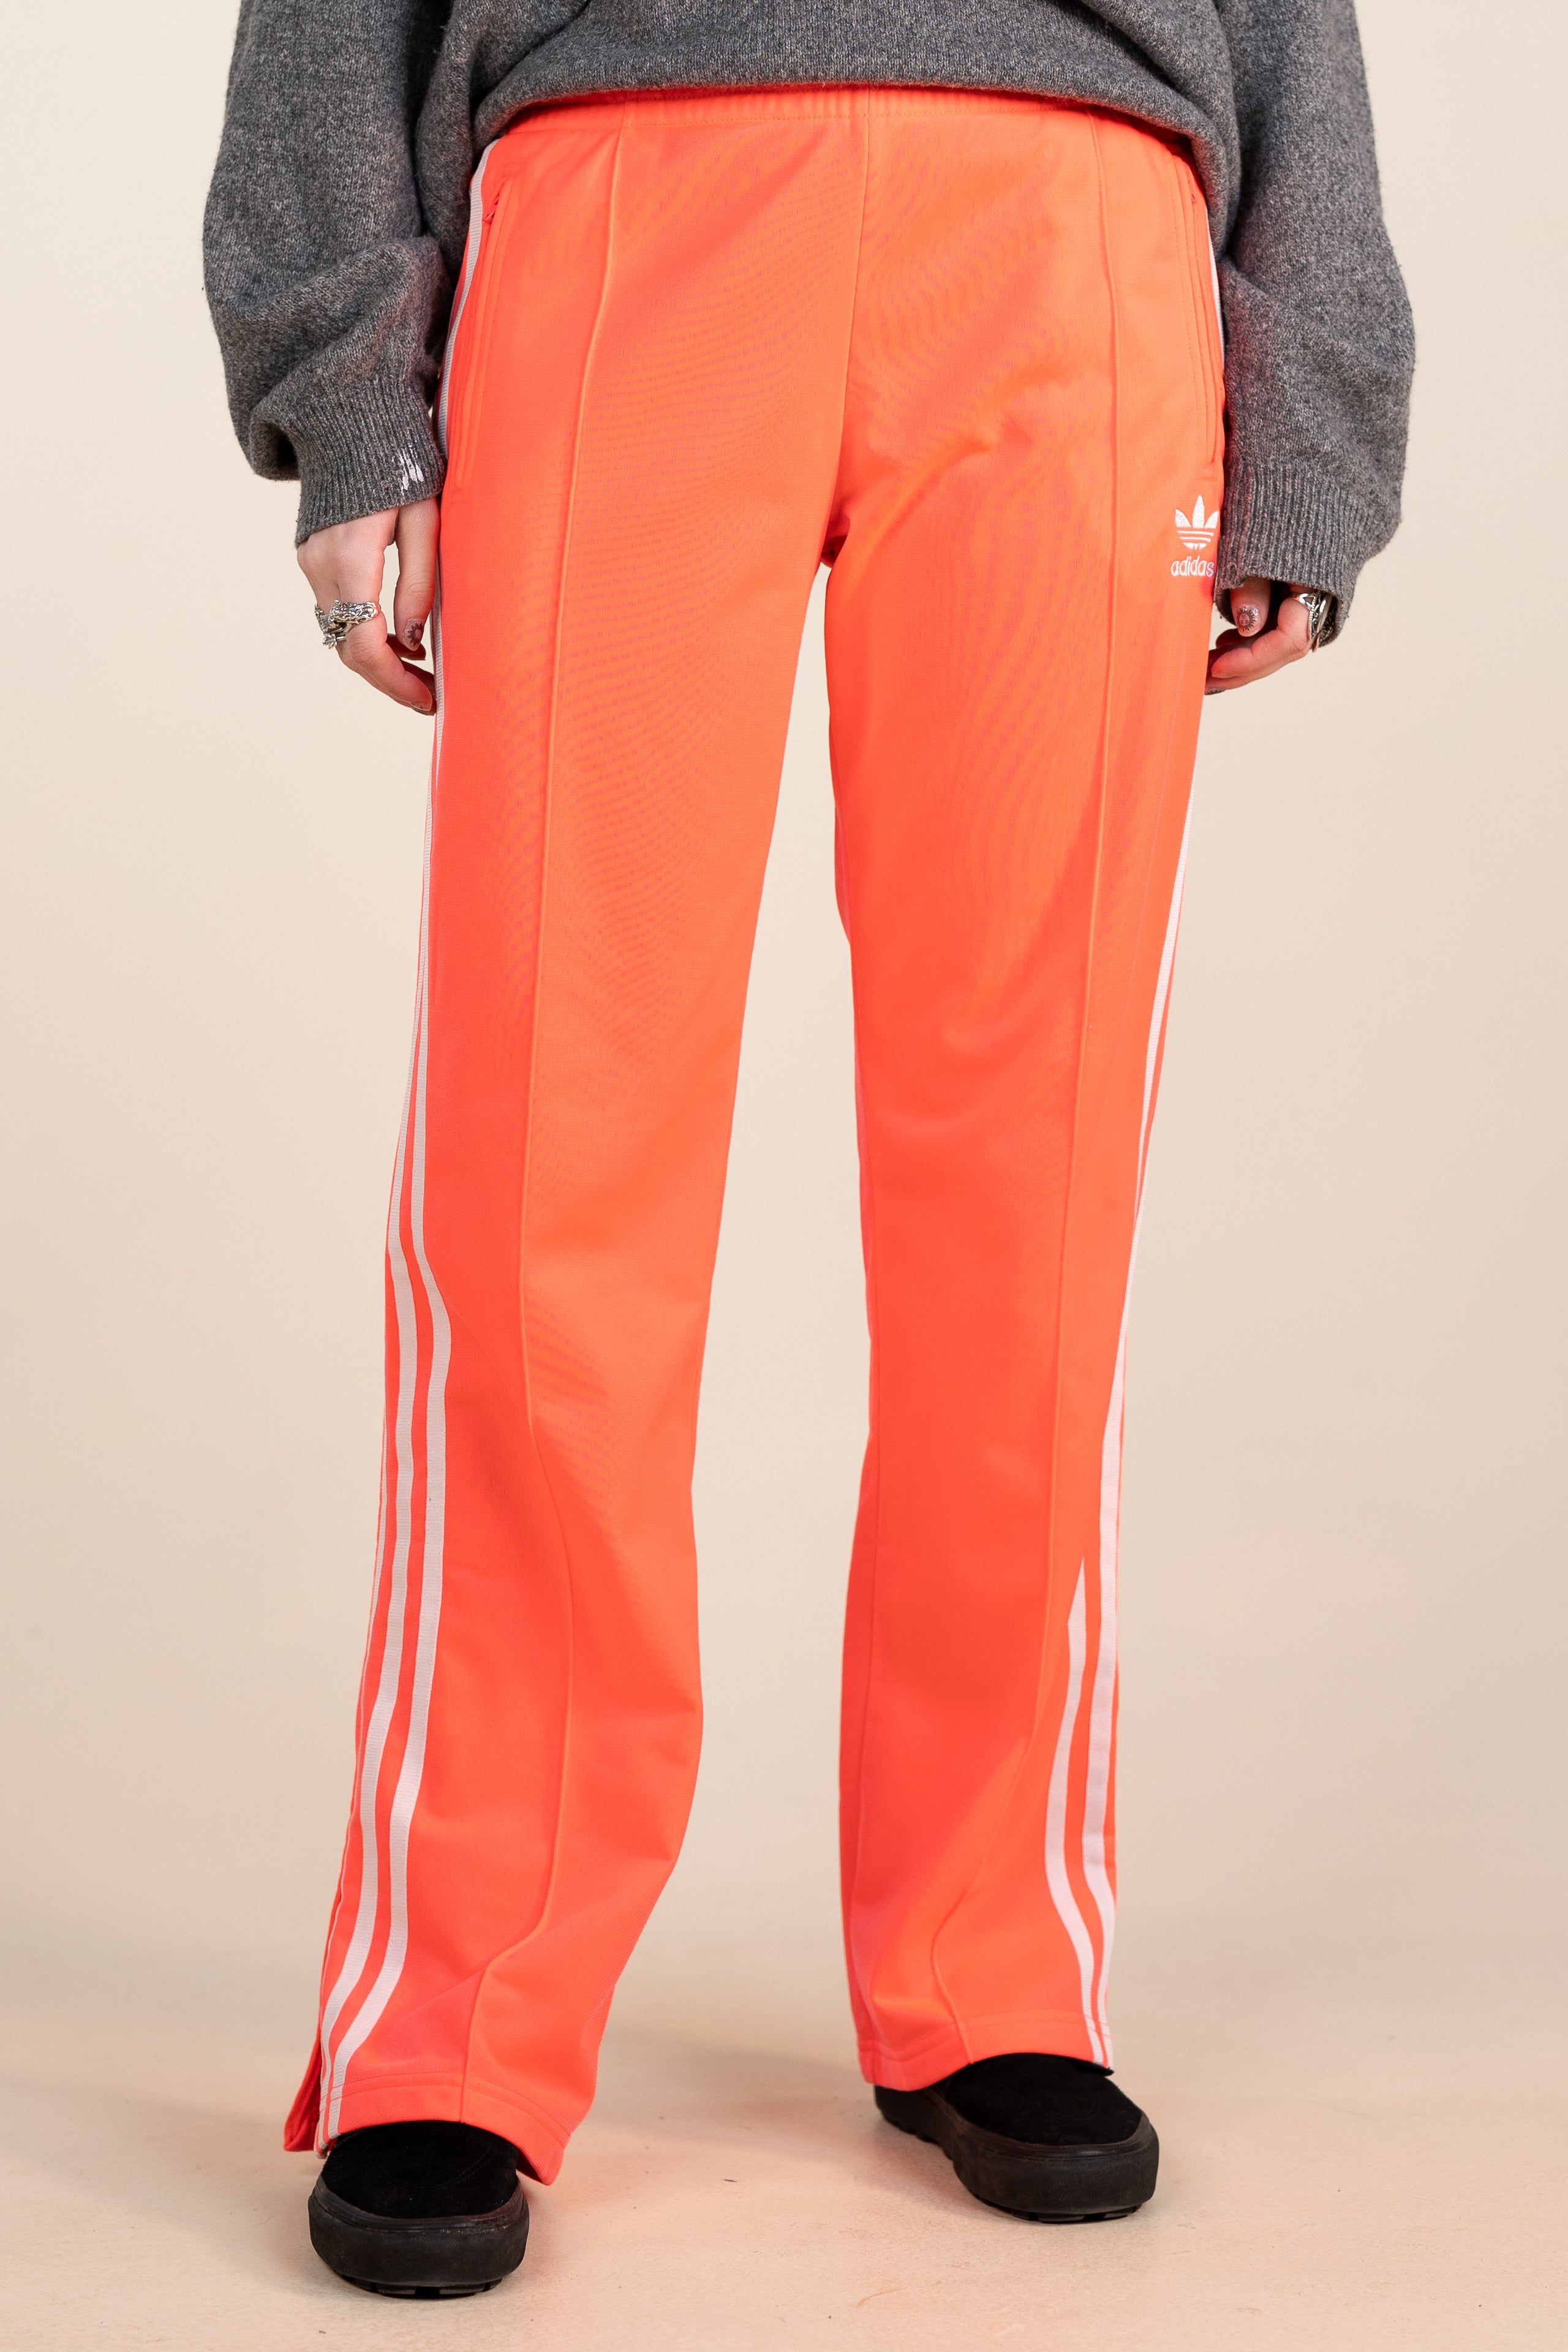 Joggers by Adidas